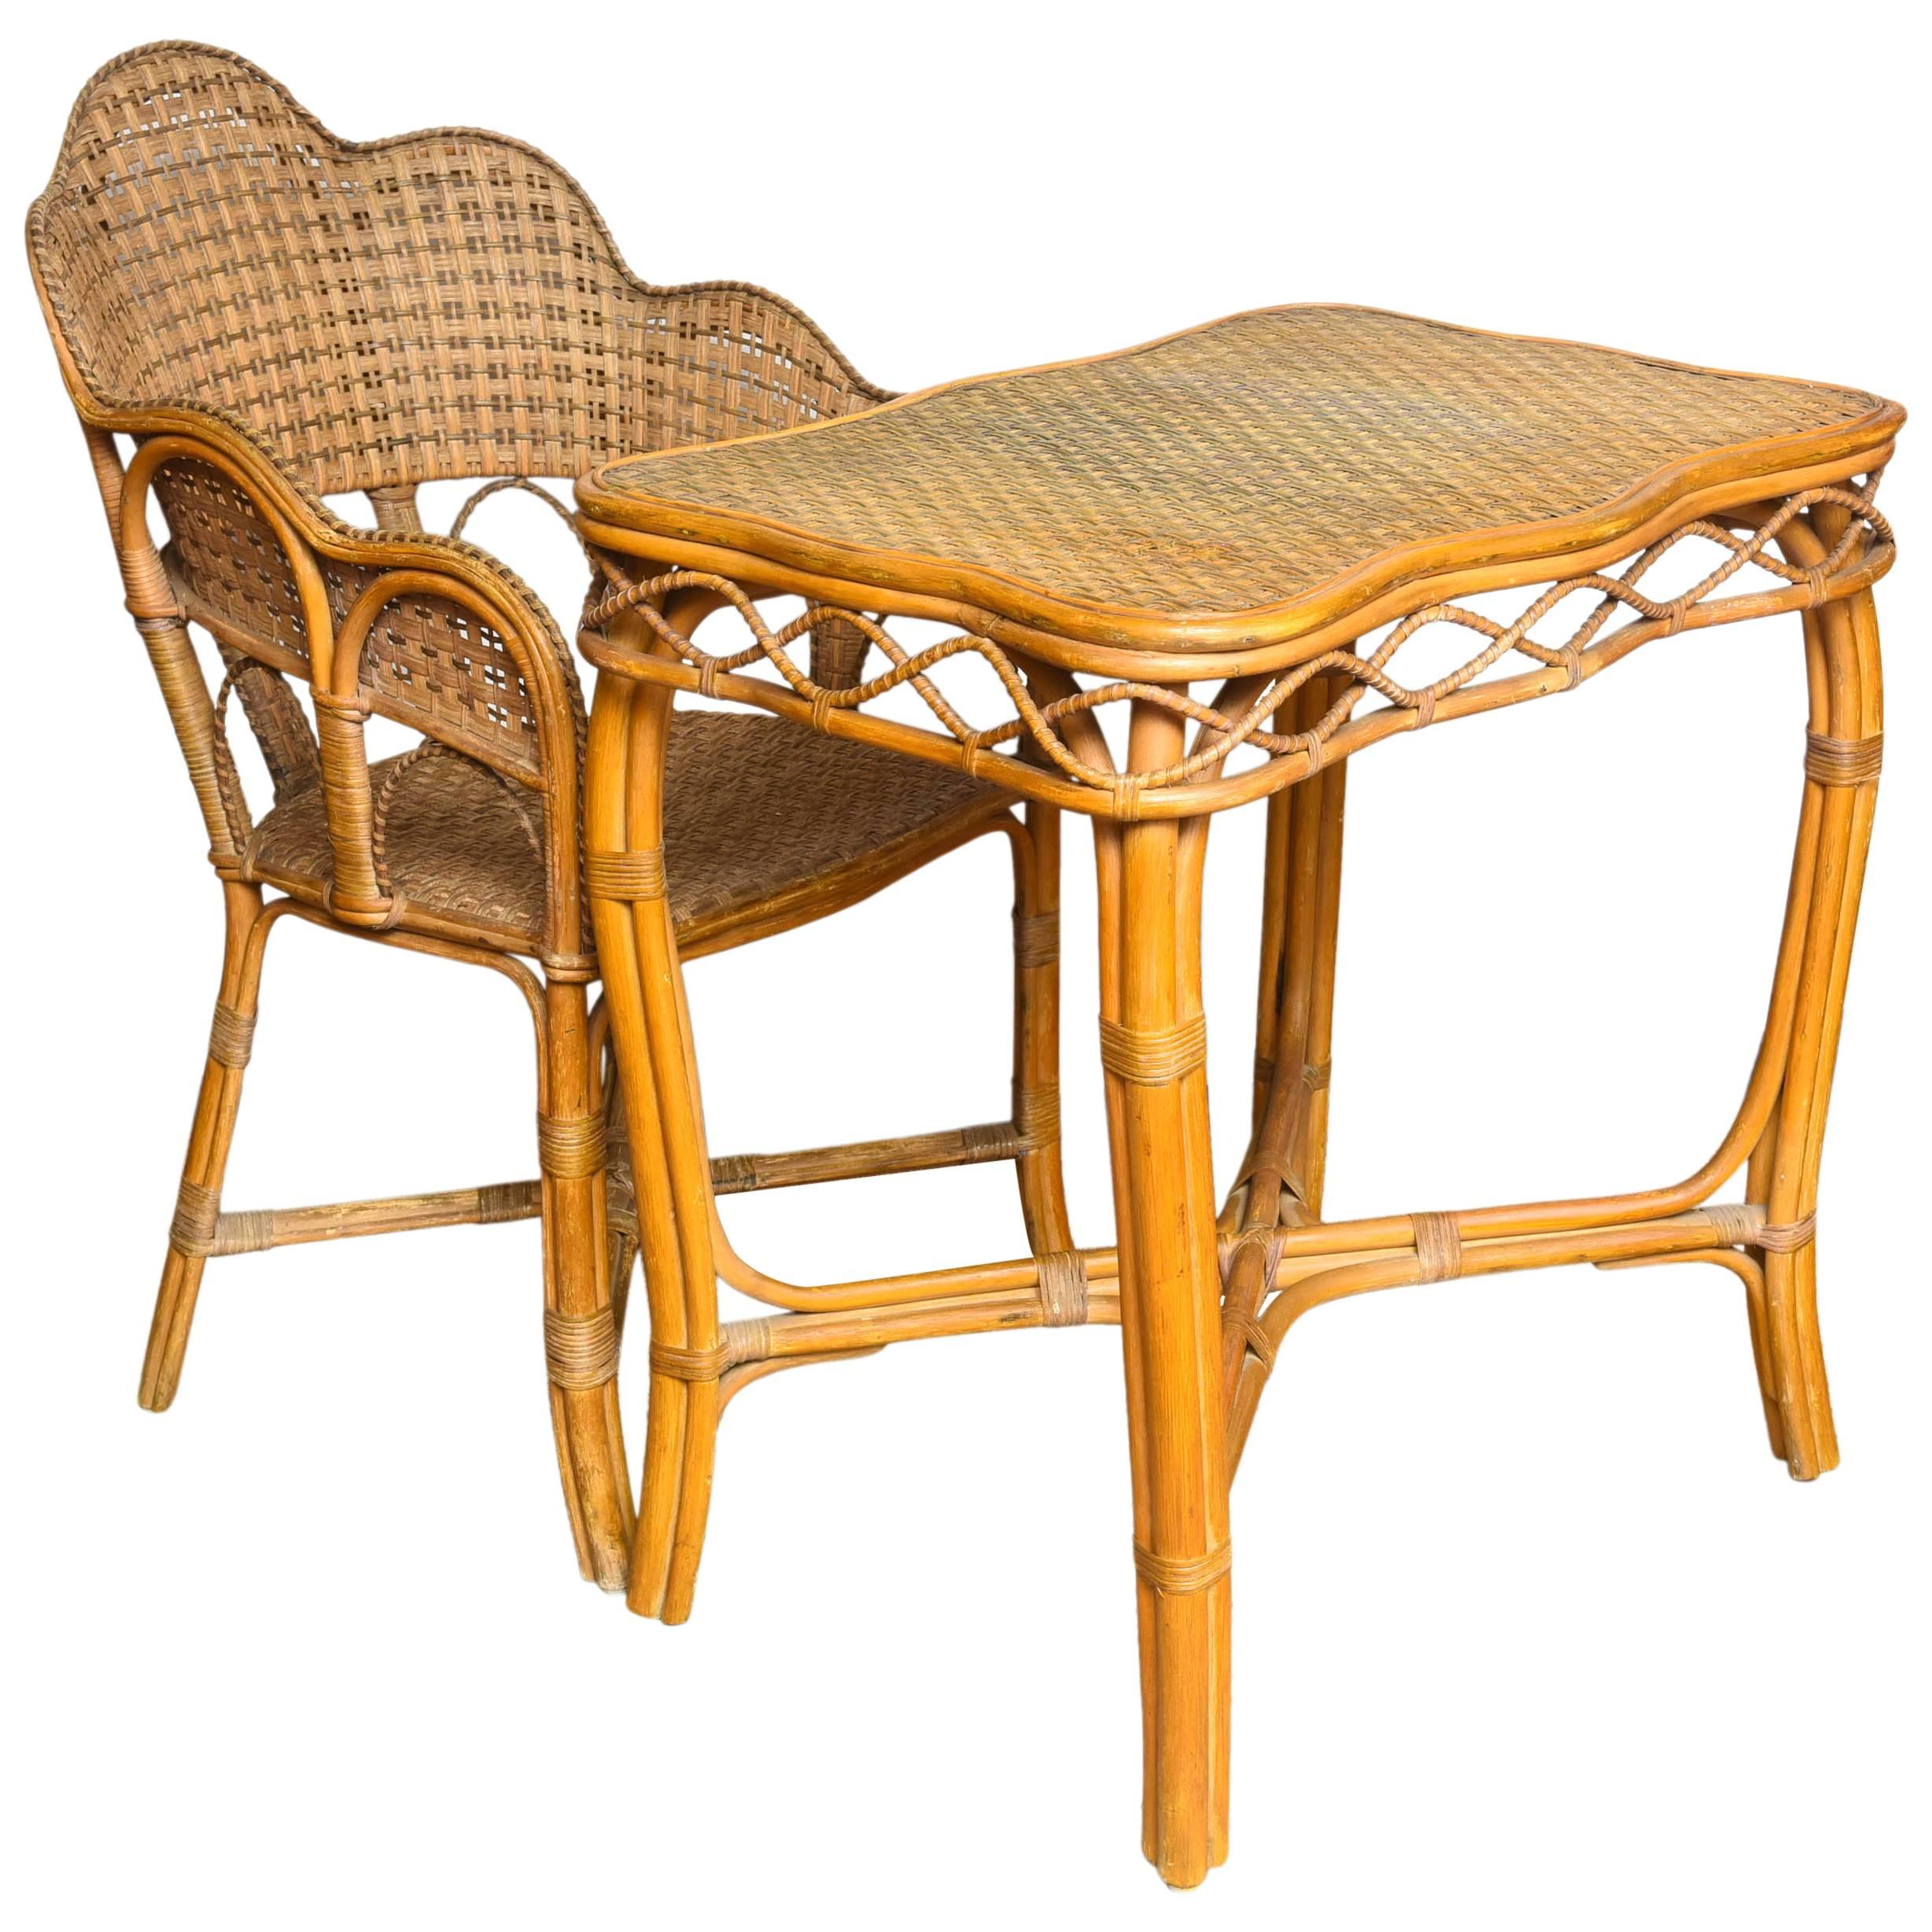 Set of Very Unusual French Vintage Rattan Table and Chair